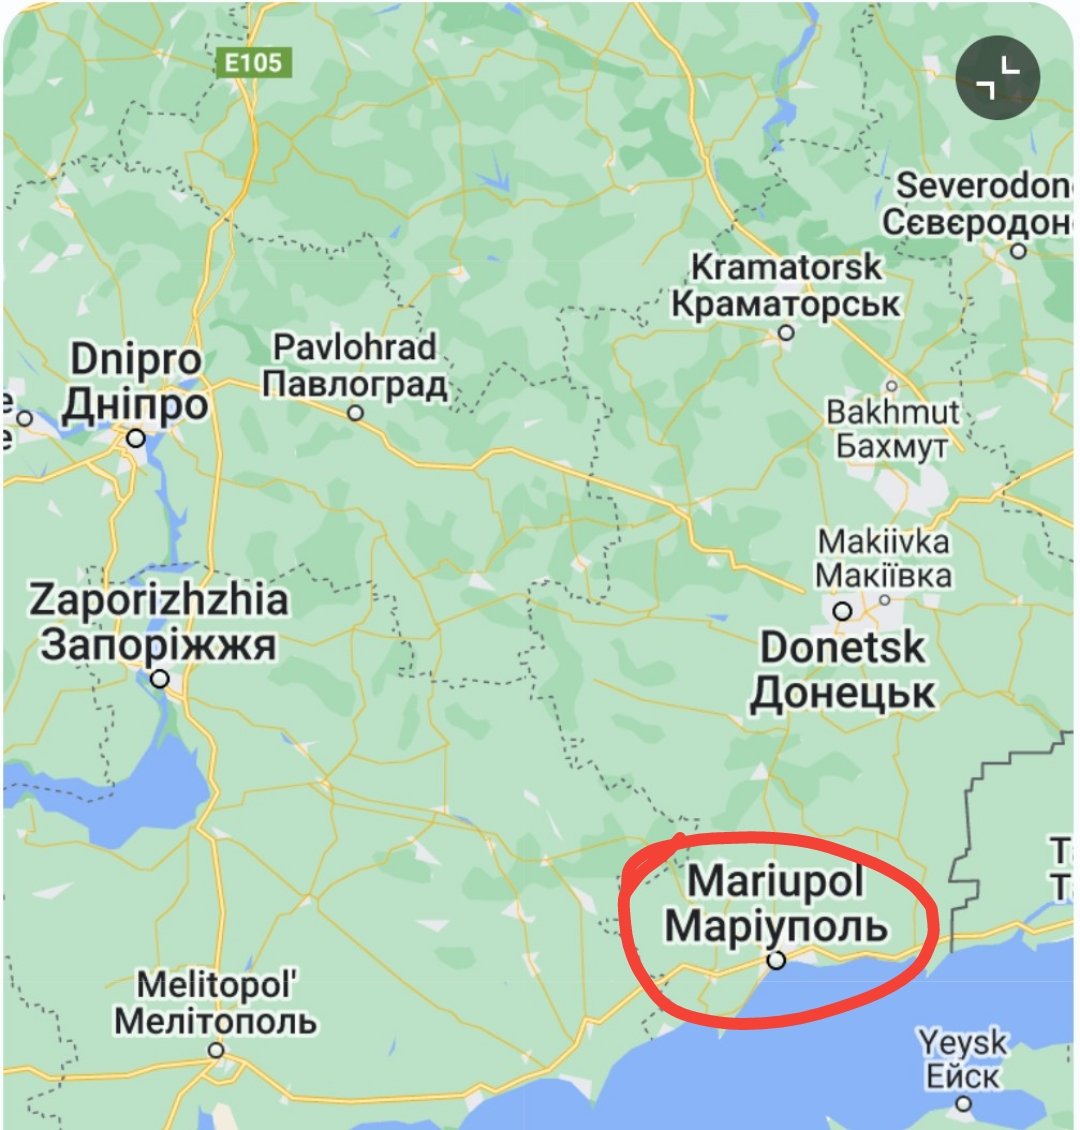 ❗Explosions in temporarily occupied Mariupol